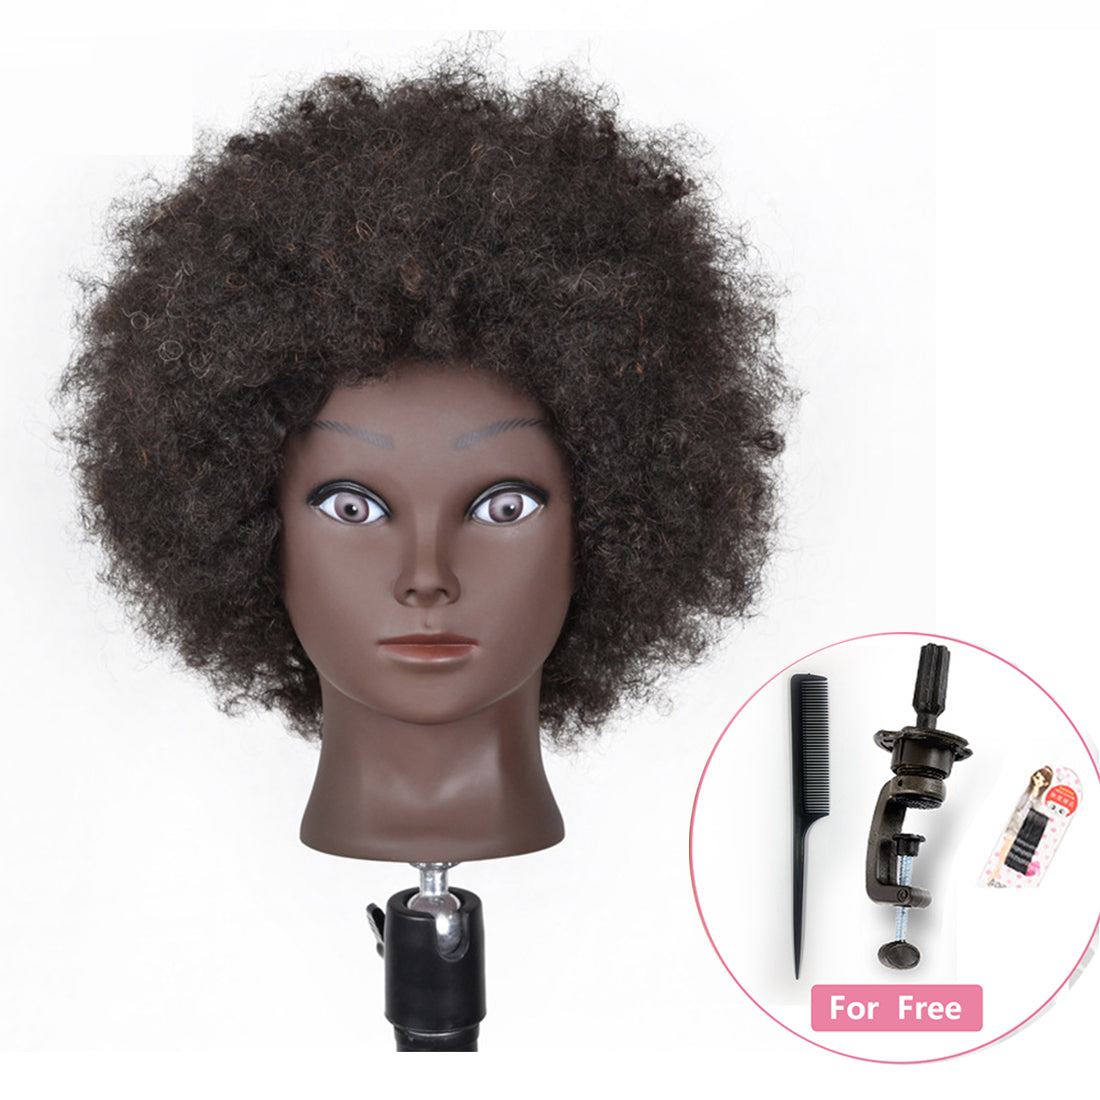 Mannequin Head 100% Human Hair Manikin Head Styling Hairdresser Training Head  Cosmetology Doll Head for Hairstyling and Braid 